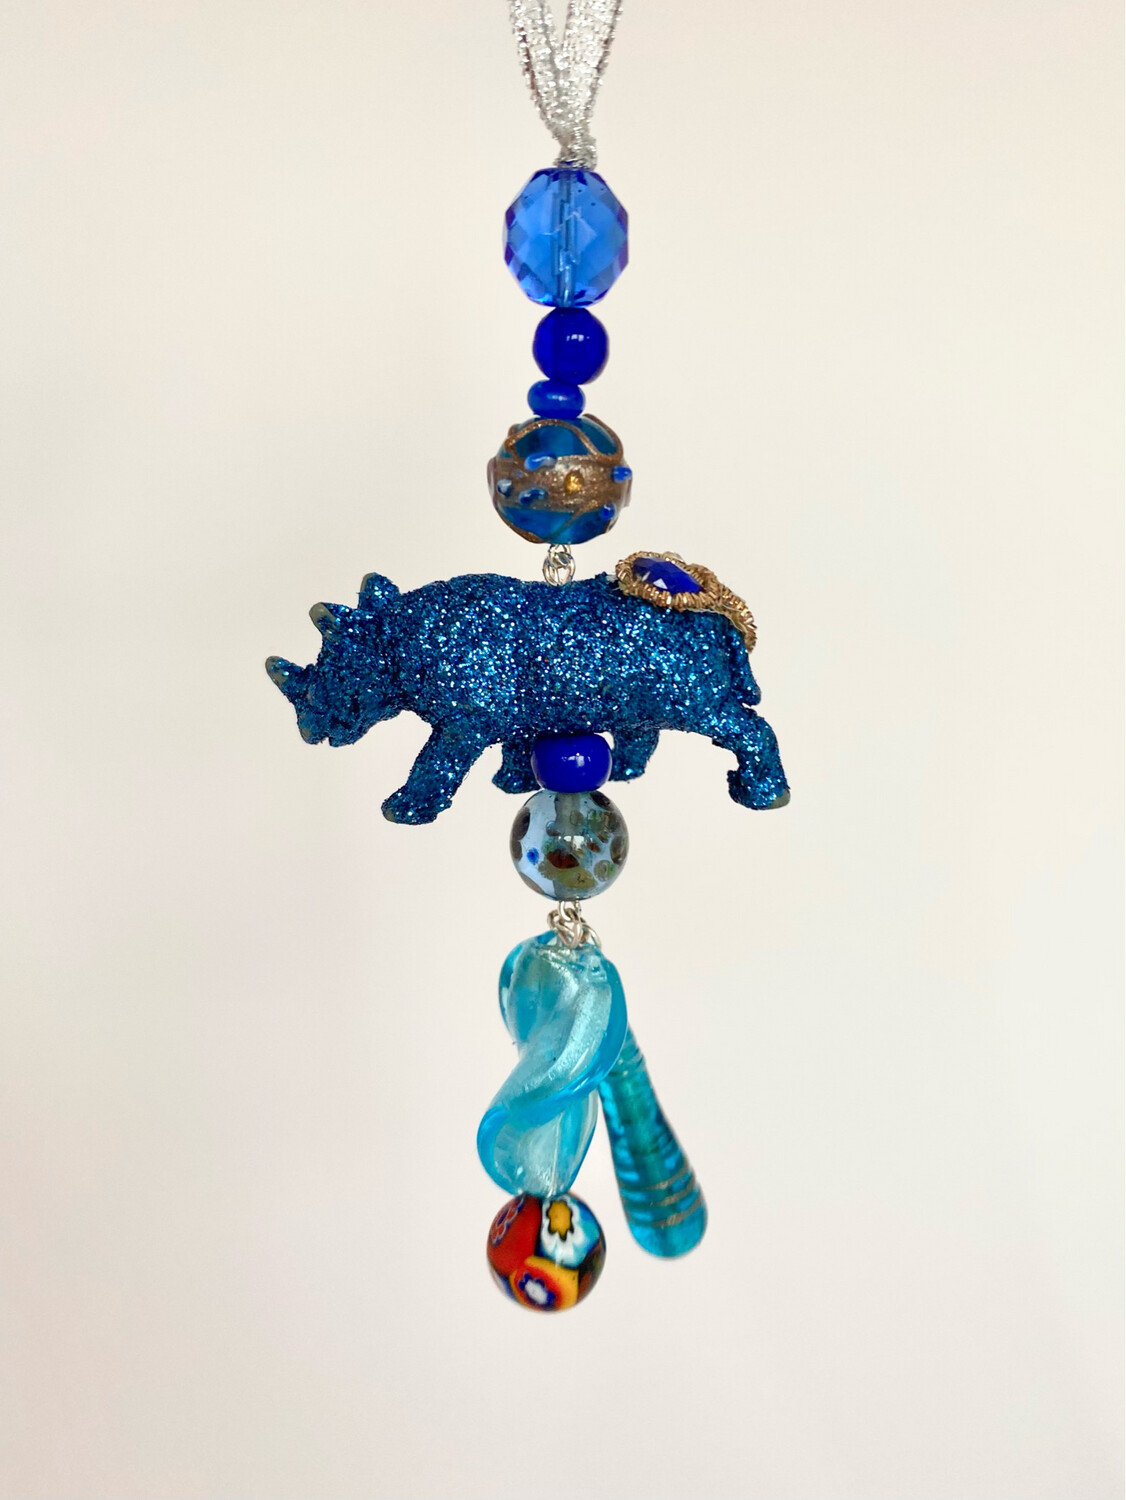 Hanging Decoration - Glitter Blue Rhino with Blue Cluster Drop